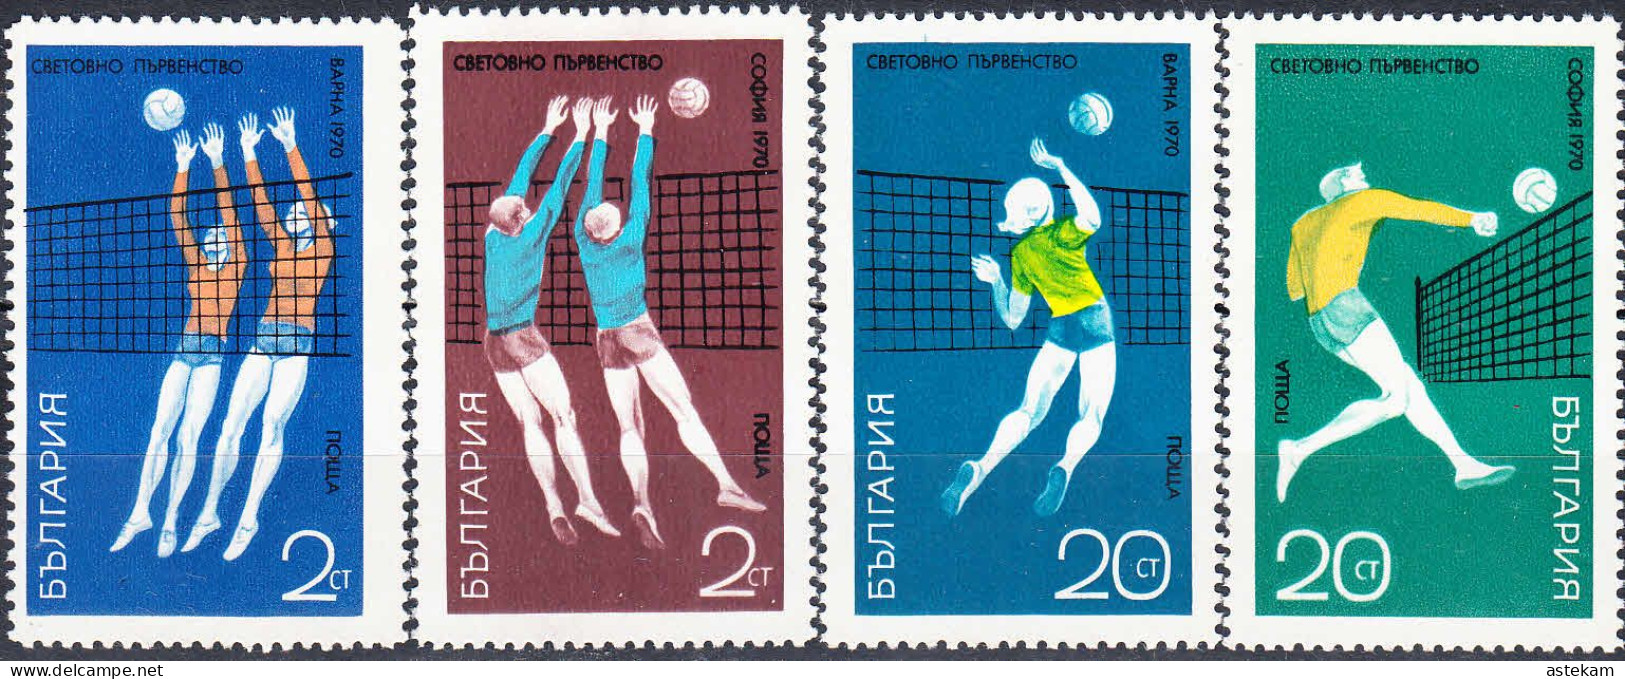 BULGARIA 1970, SPORT, WORLD VOLLEYBALL CHAMPIONSHIP For MEN And WOMEN In SOFIA, COMPLETE MNH SERIES With GOOD QUALITY*** - Ongebruikt